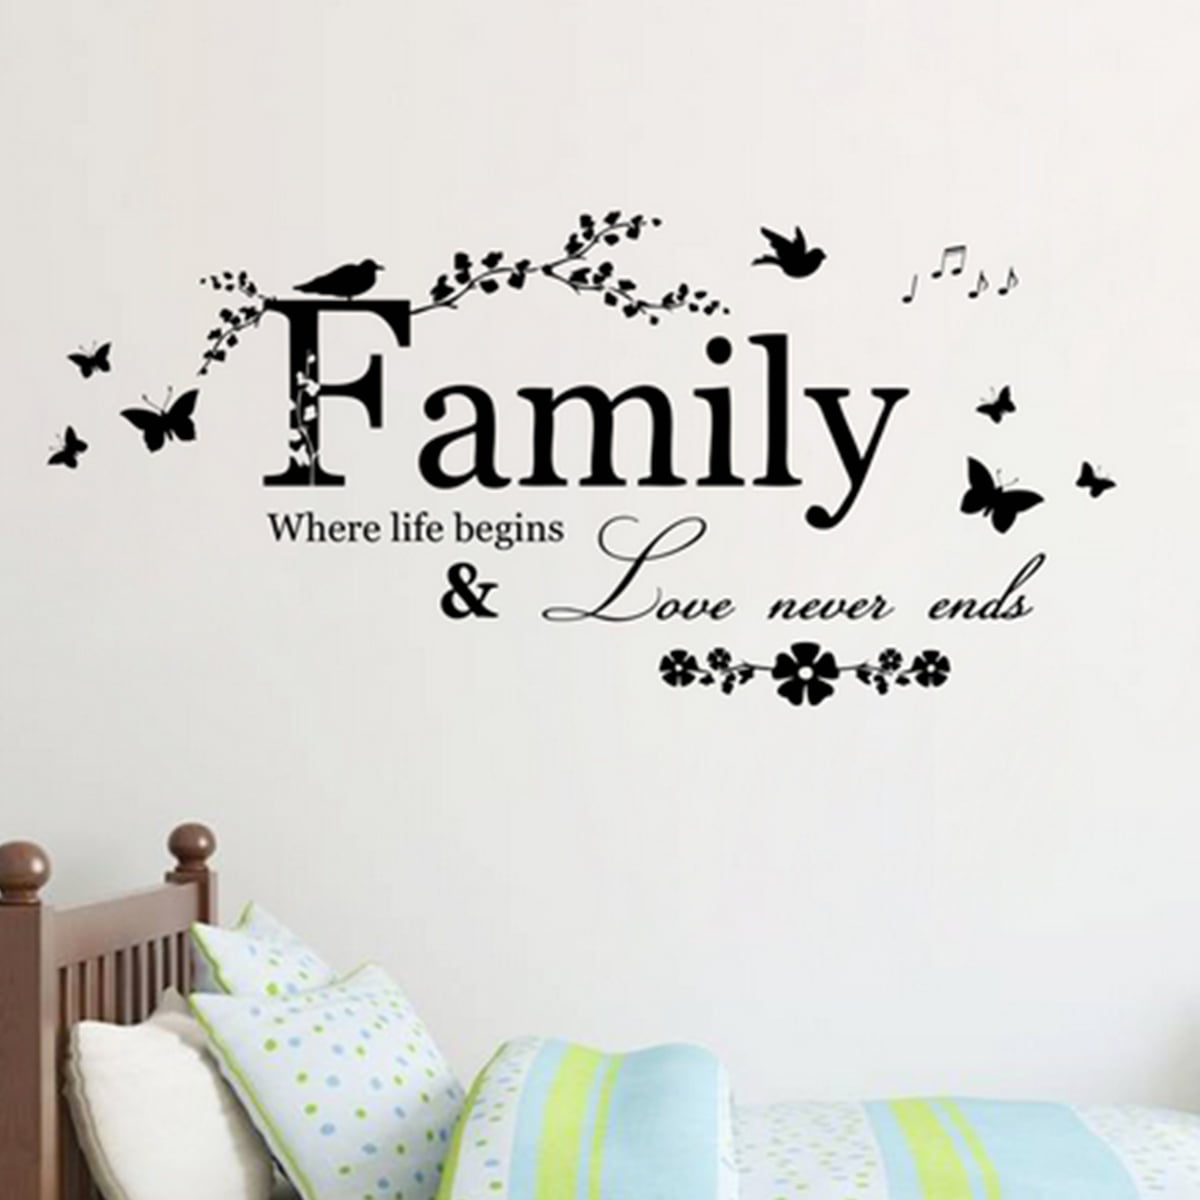 23"-99" Vinyl Home Room Decor Art Quote Wall Decal Stickers Removable Mural DIY